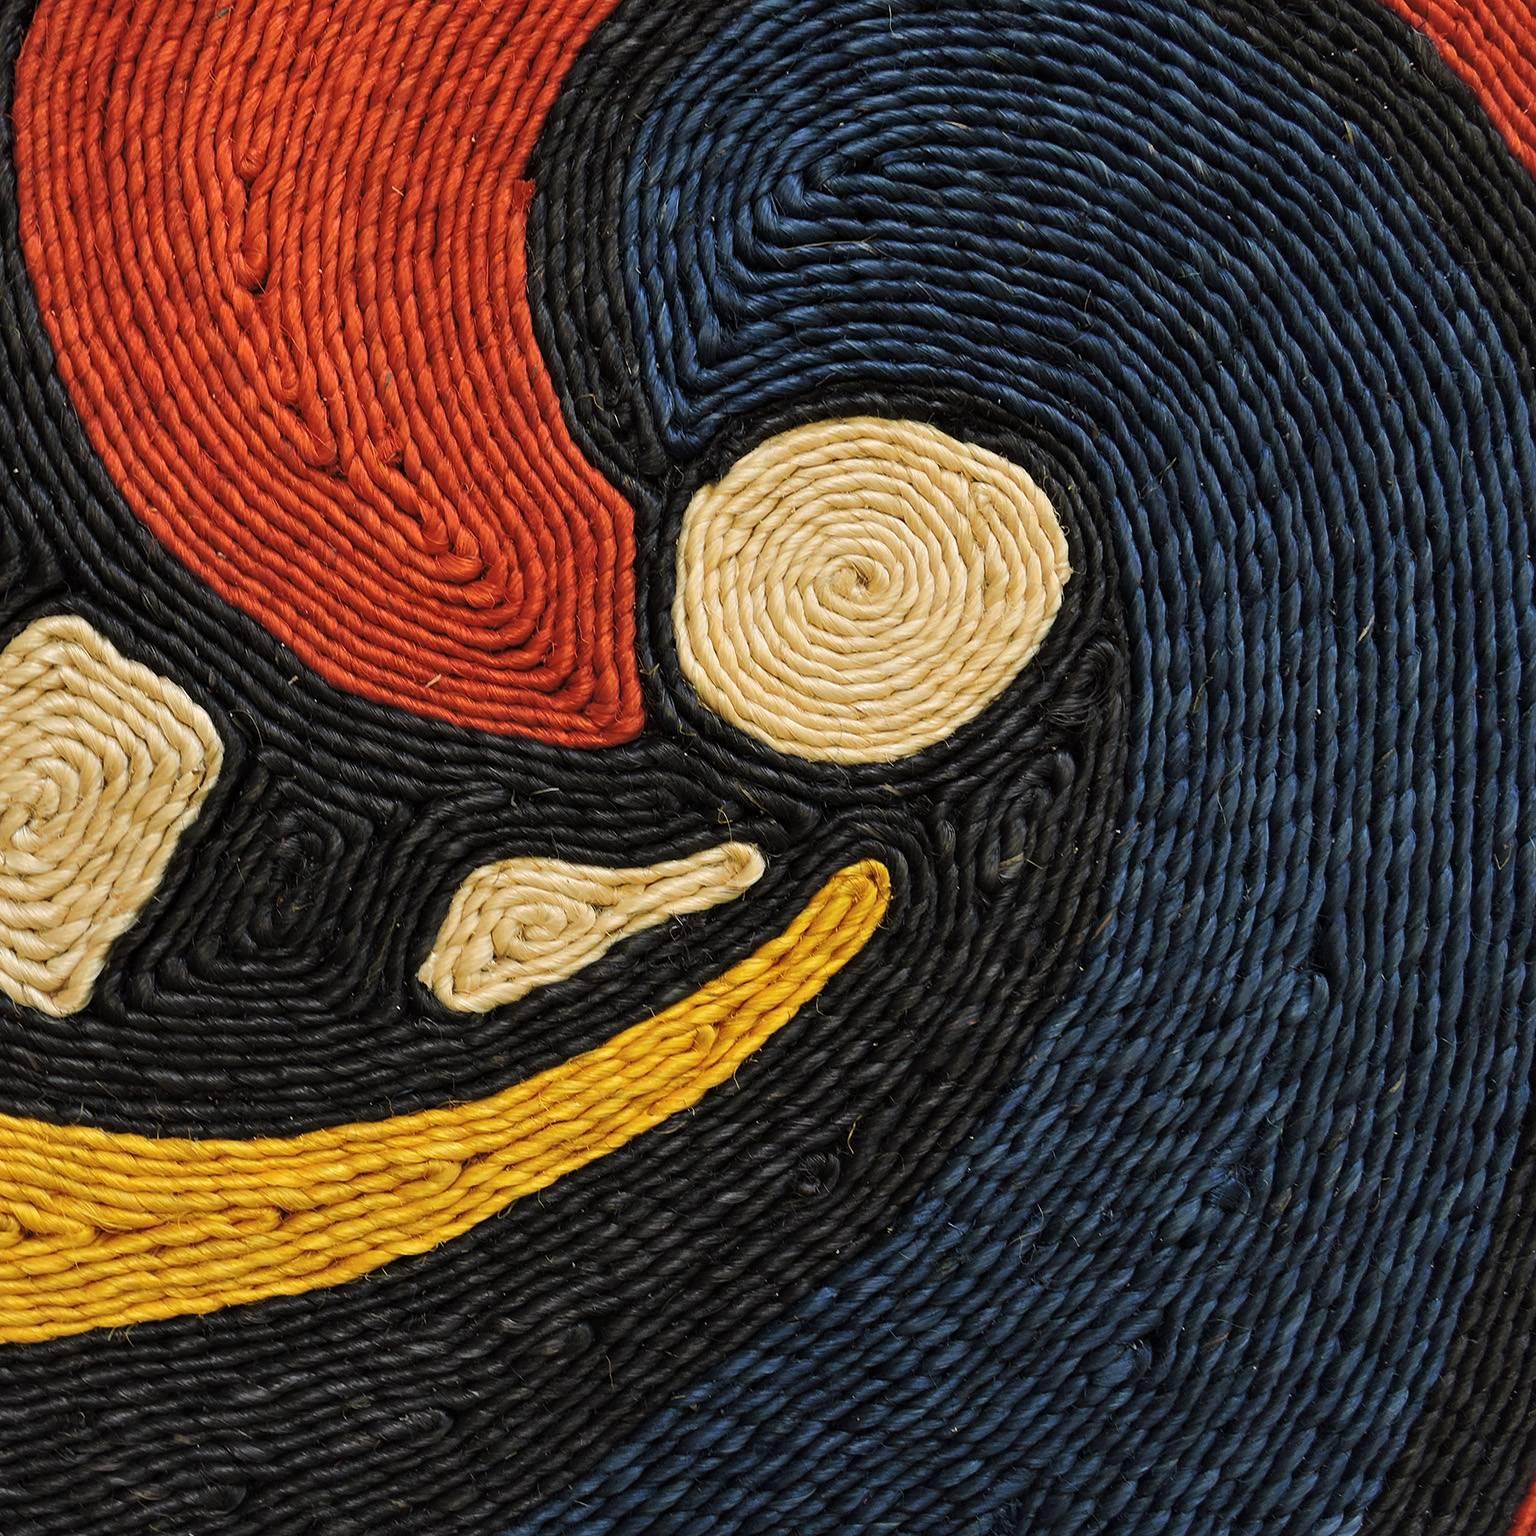 Maguey fiber mat wall hanging after Alexander Calder (American, 1898-1976.)
circa 1975; Produced by C.A.C. Publications, number 22 from an edition of 100, dyed and woven Maguey fiber, made in Central America; signed and dated in weave © Calder 75